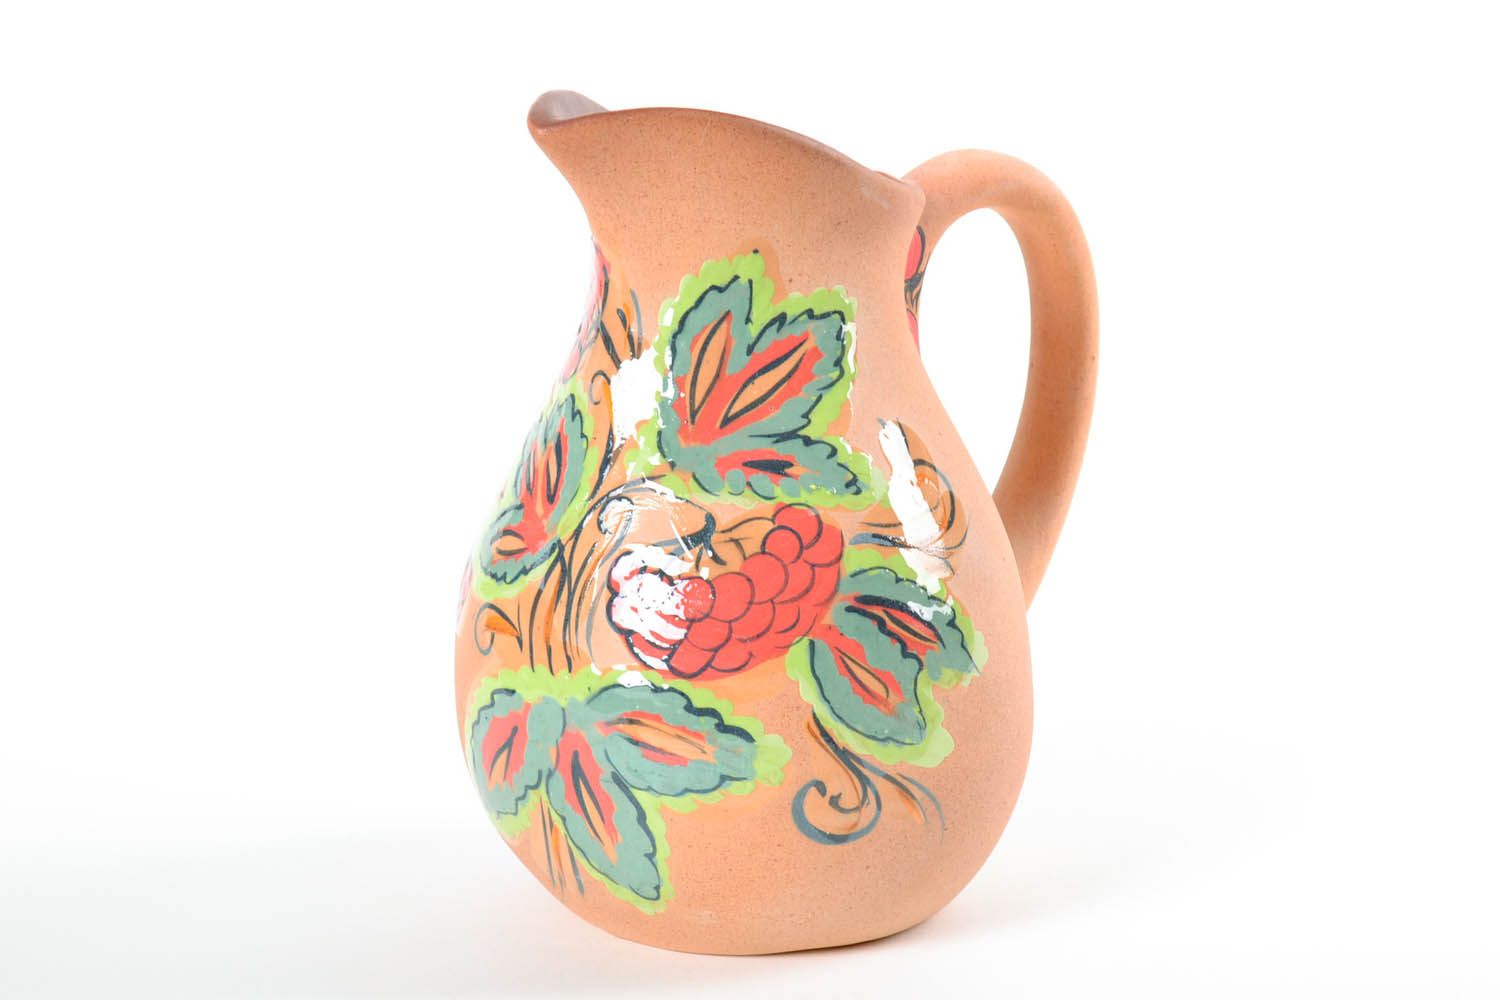 60 oz handmade lead-free clay pitcher with handle and hand-painted floral ornament 2,2 lb photo 3